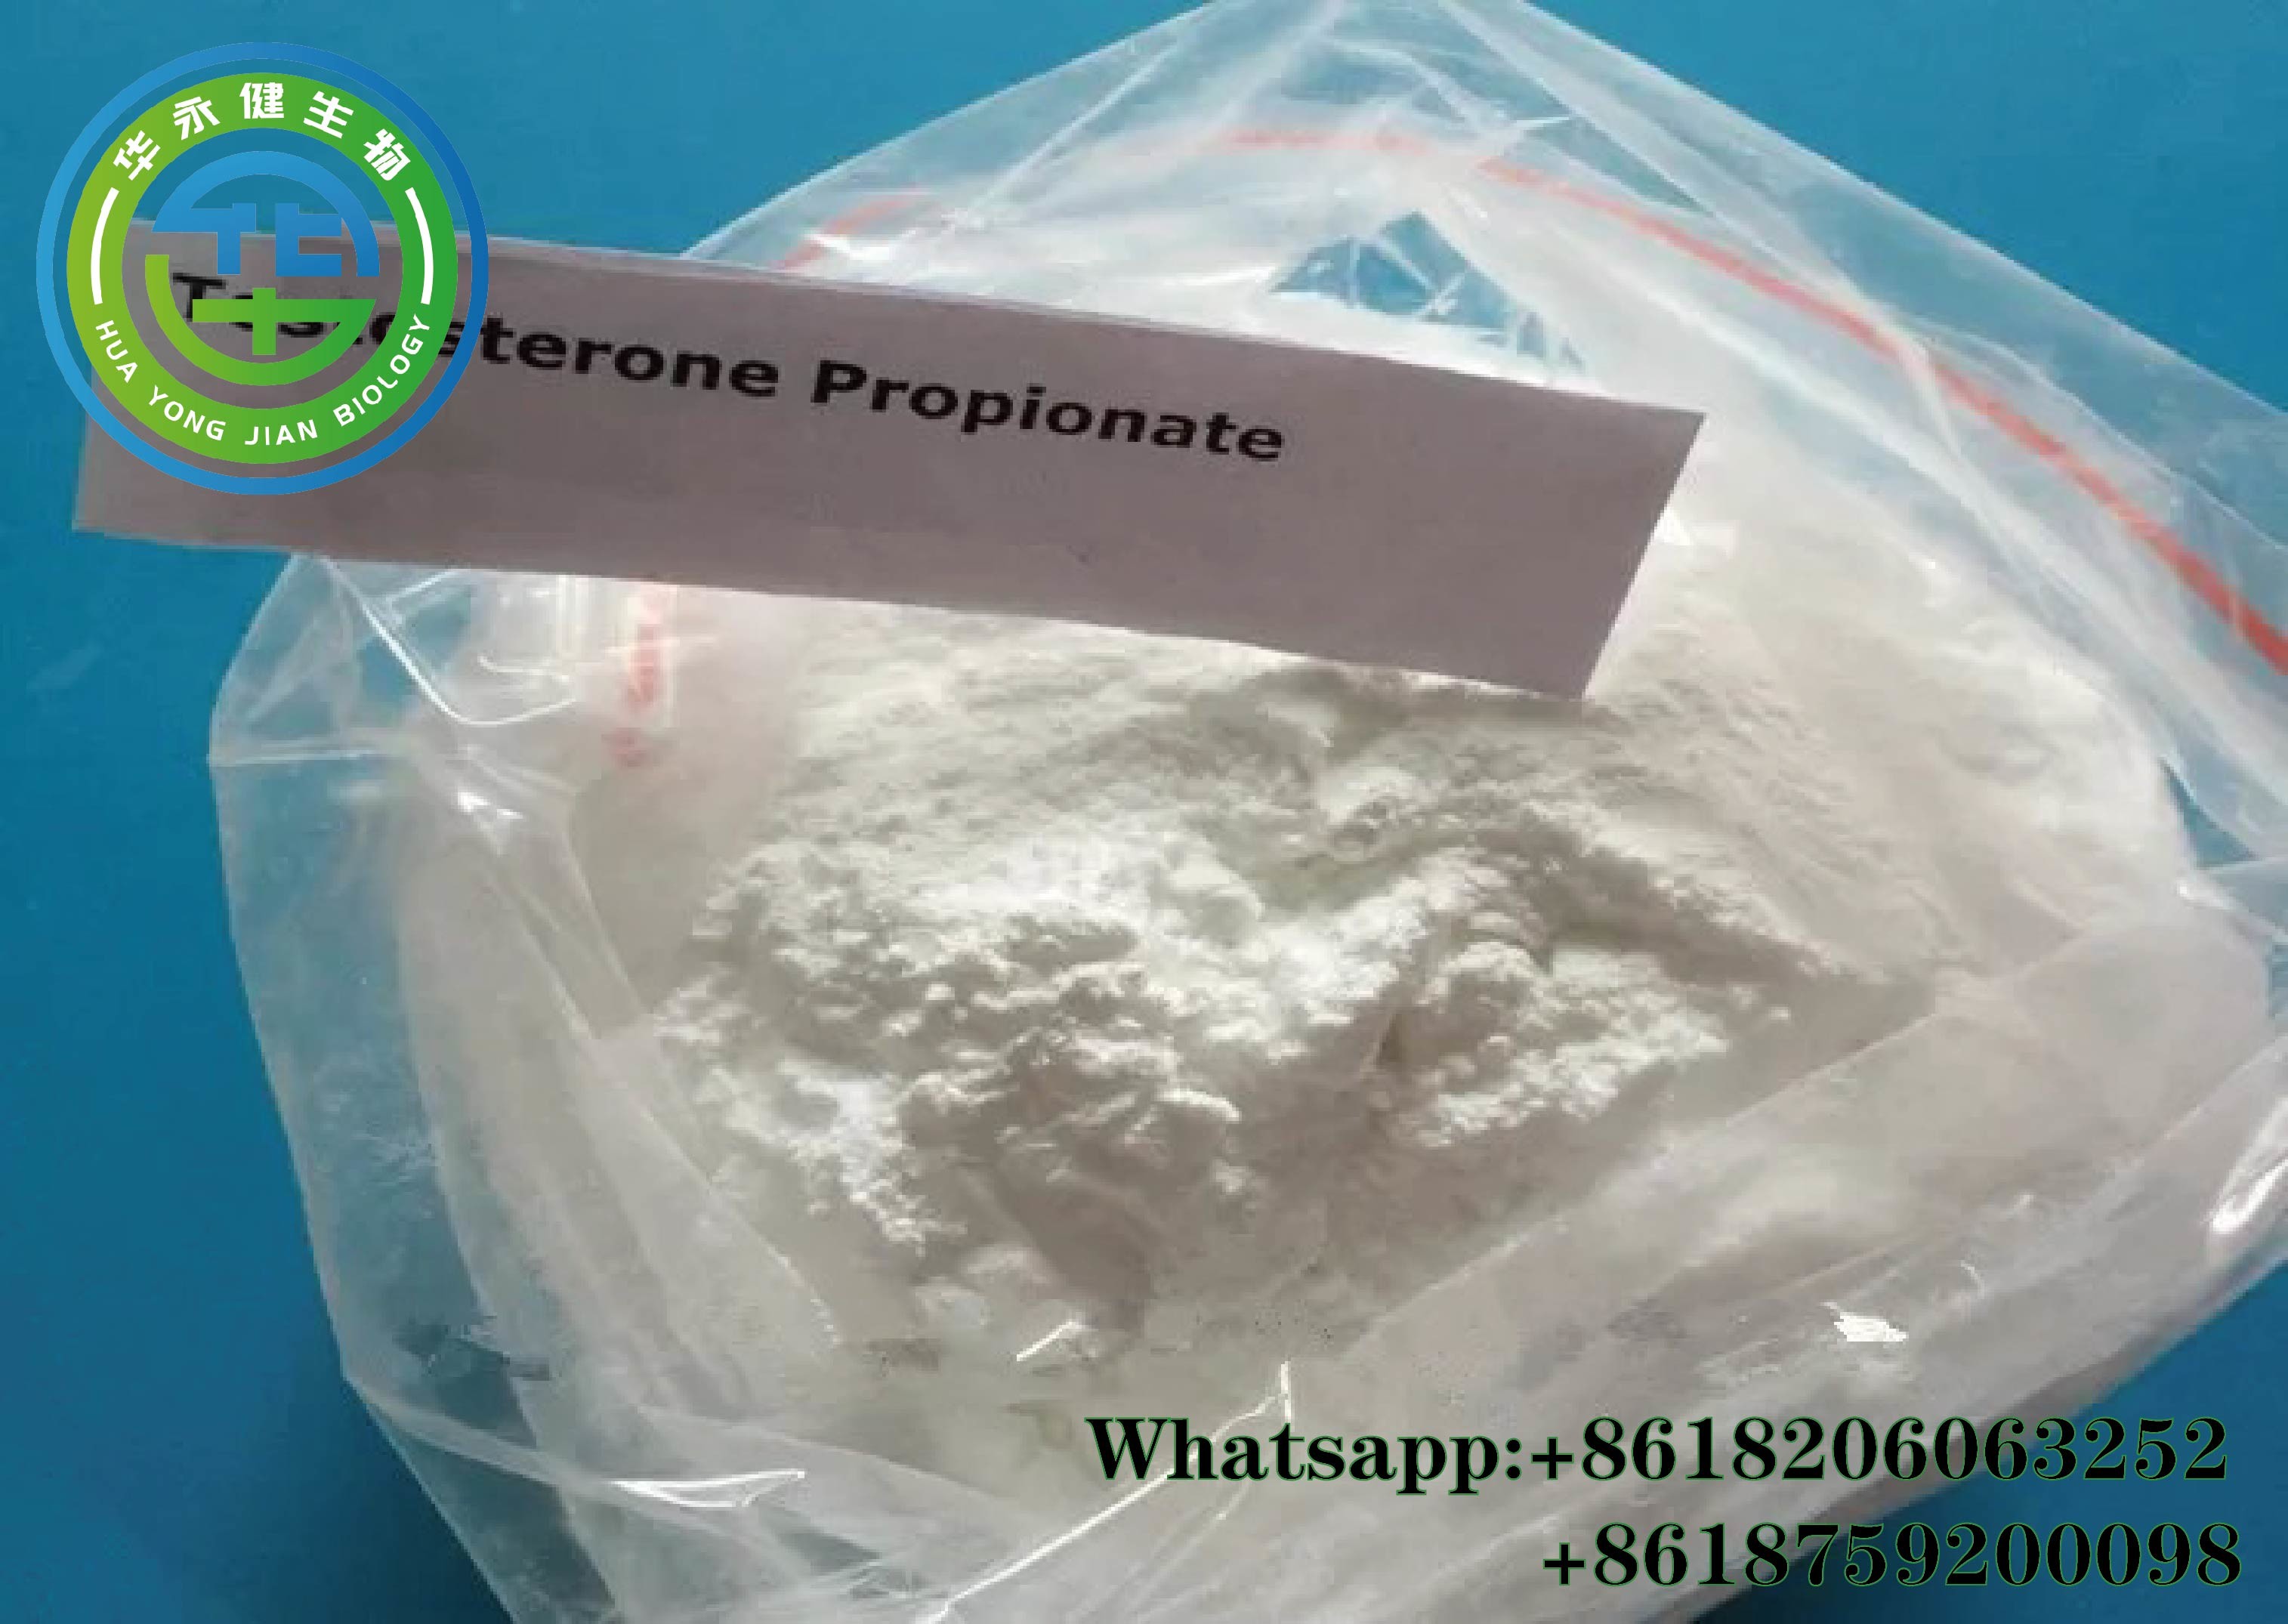 Wholesale Testosterone Propionate Raw Steroid Powders Test Prop anabolic steroids powder Test P For Muscle CasNO.57-85-2 from china suppliers